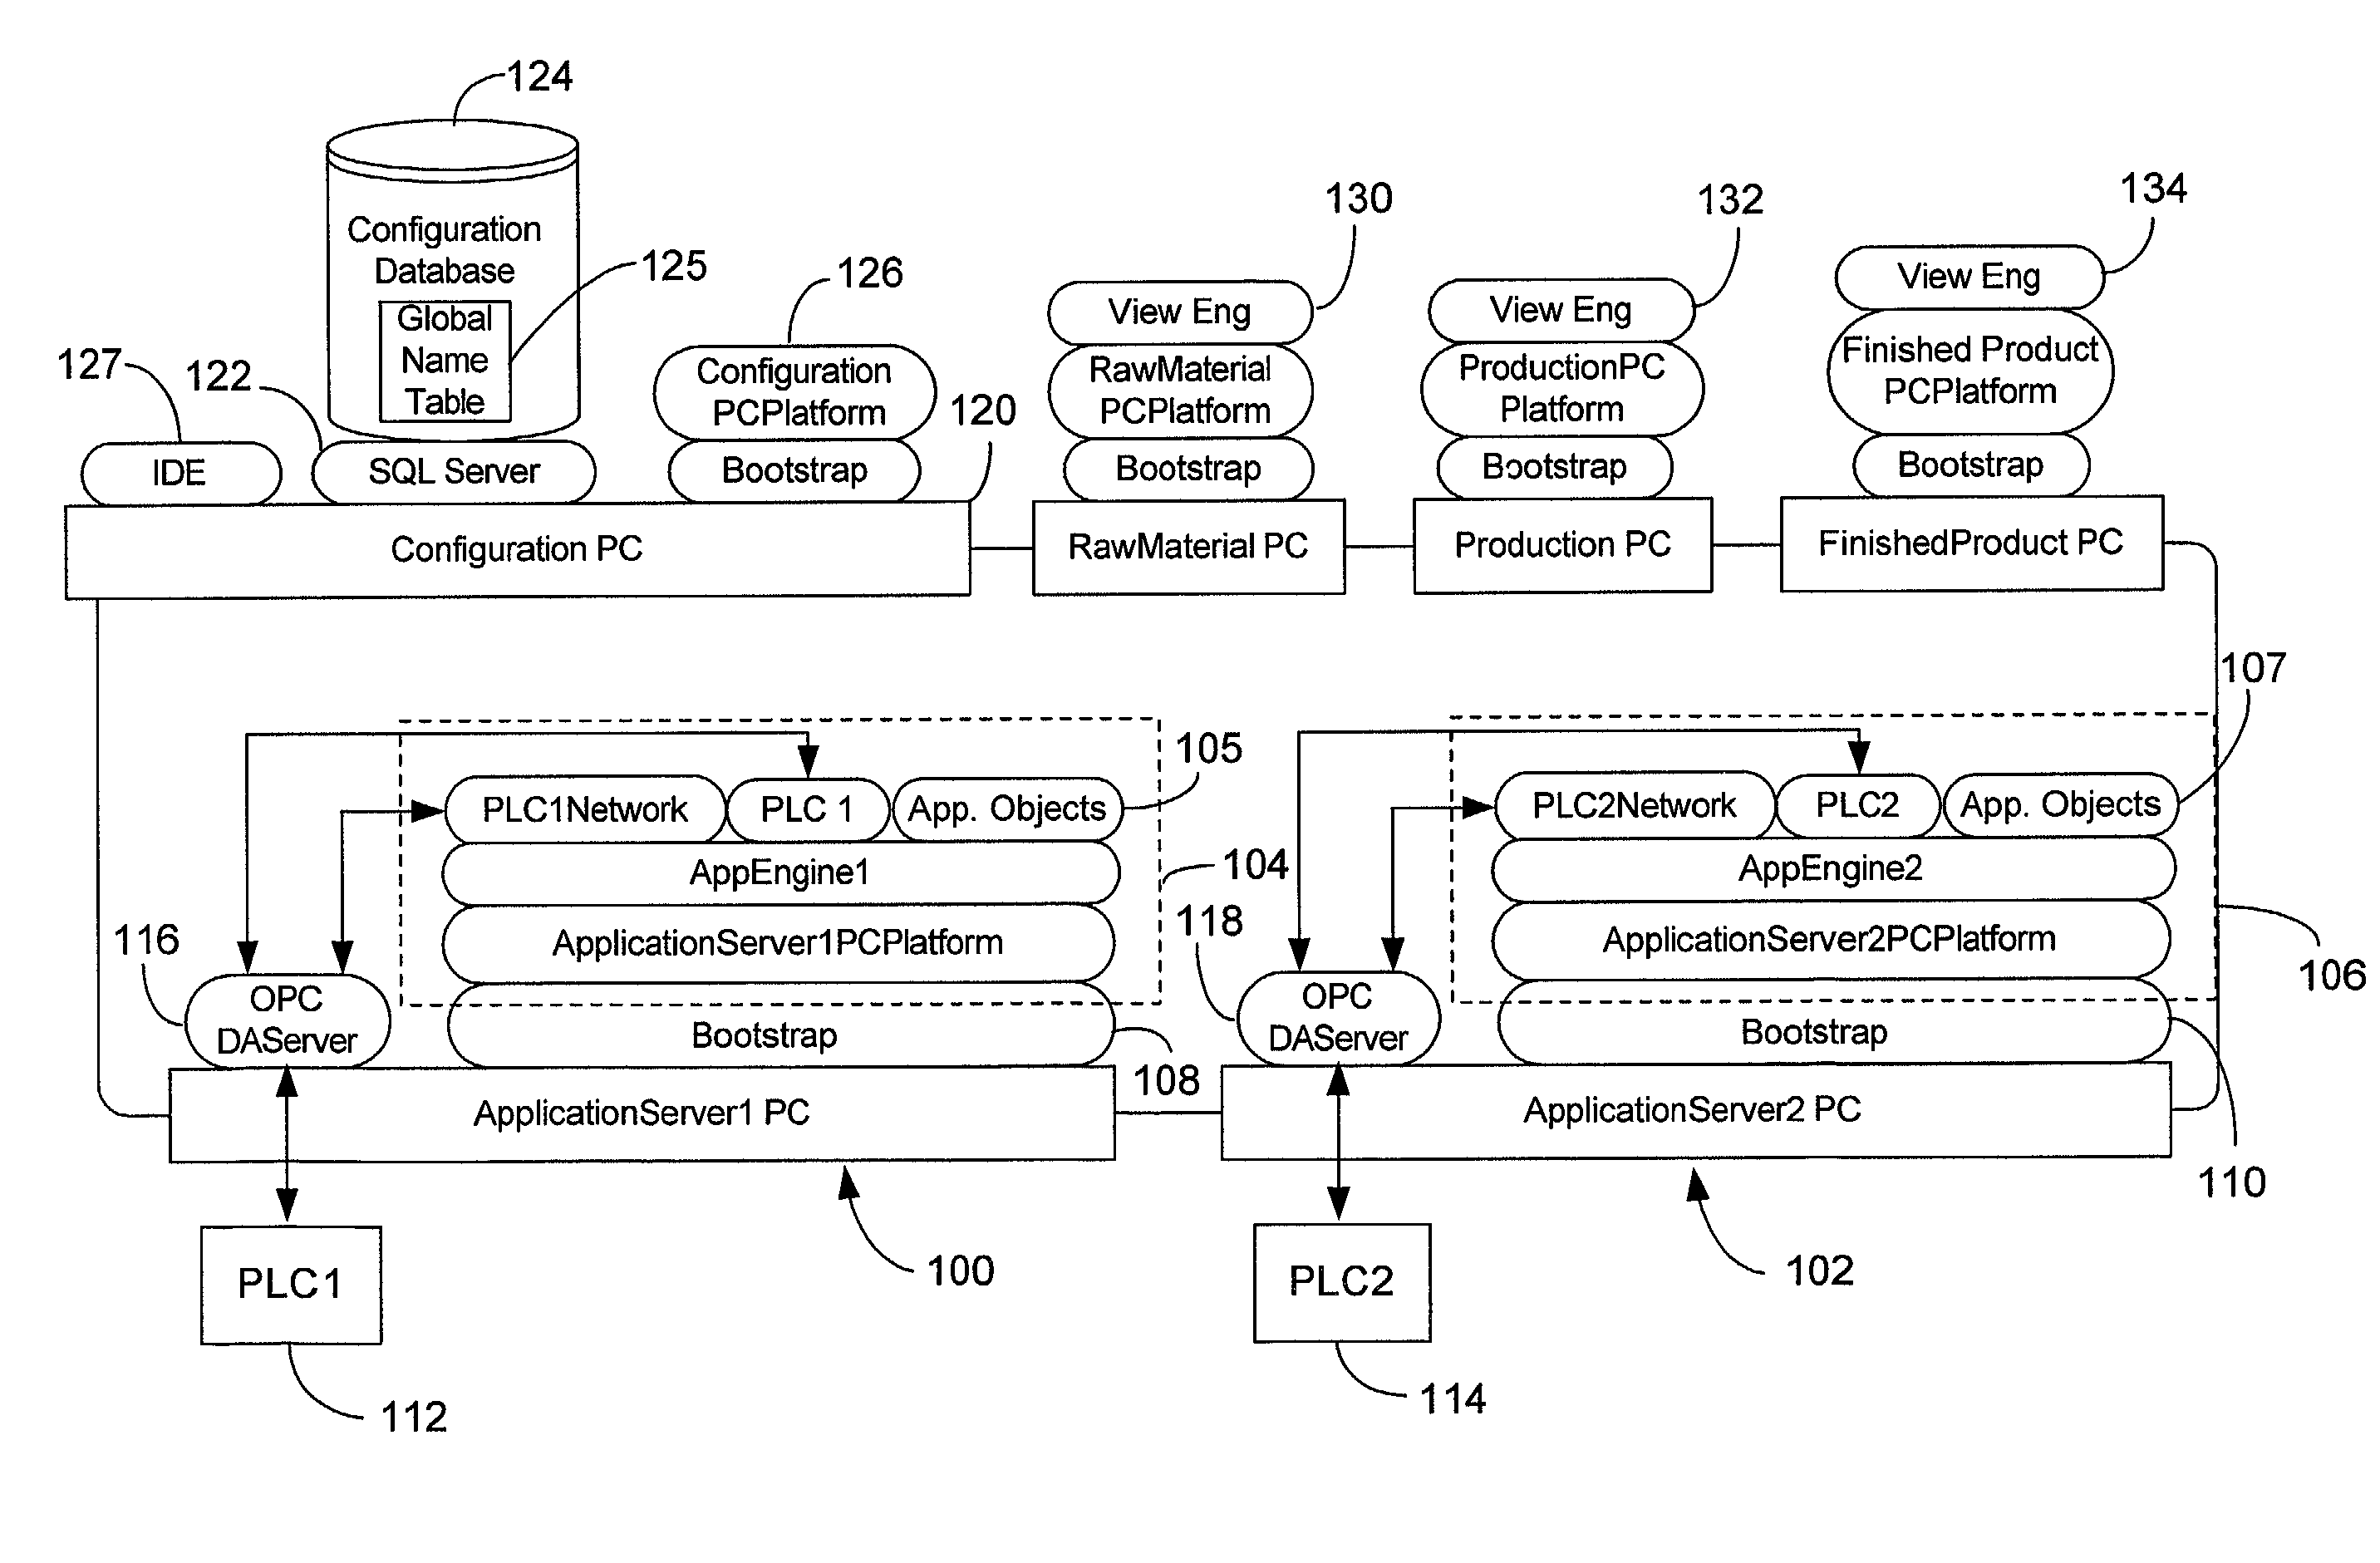 Supervisory process control and manufacturing information system application having a layered architecture